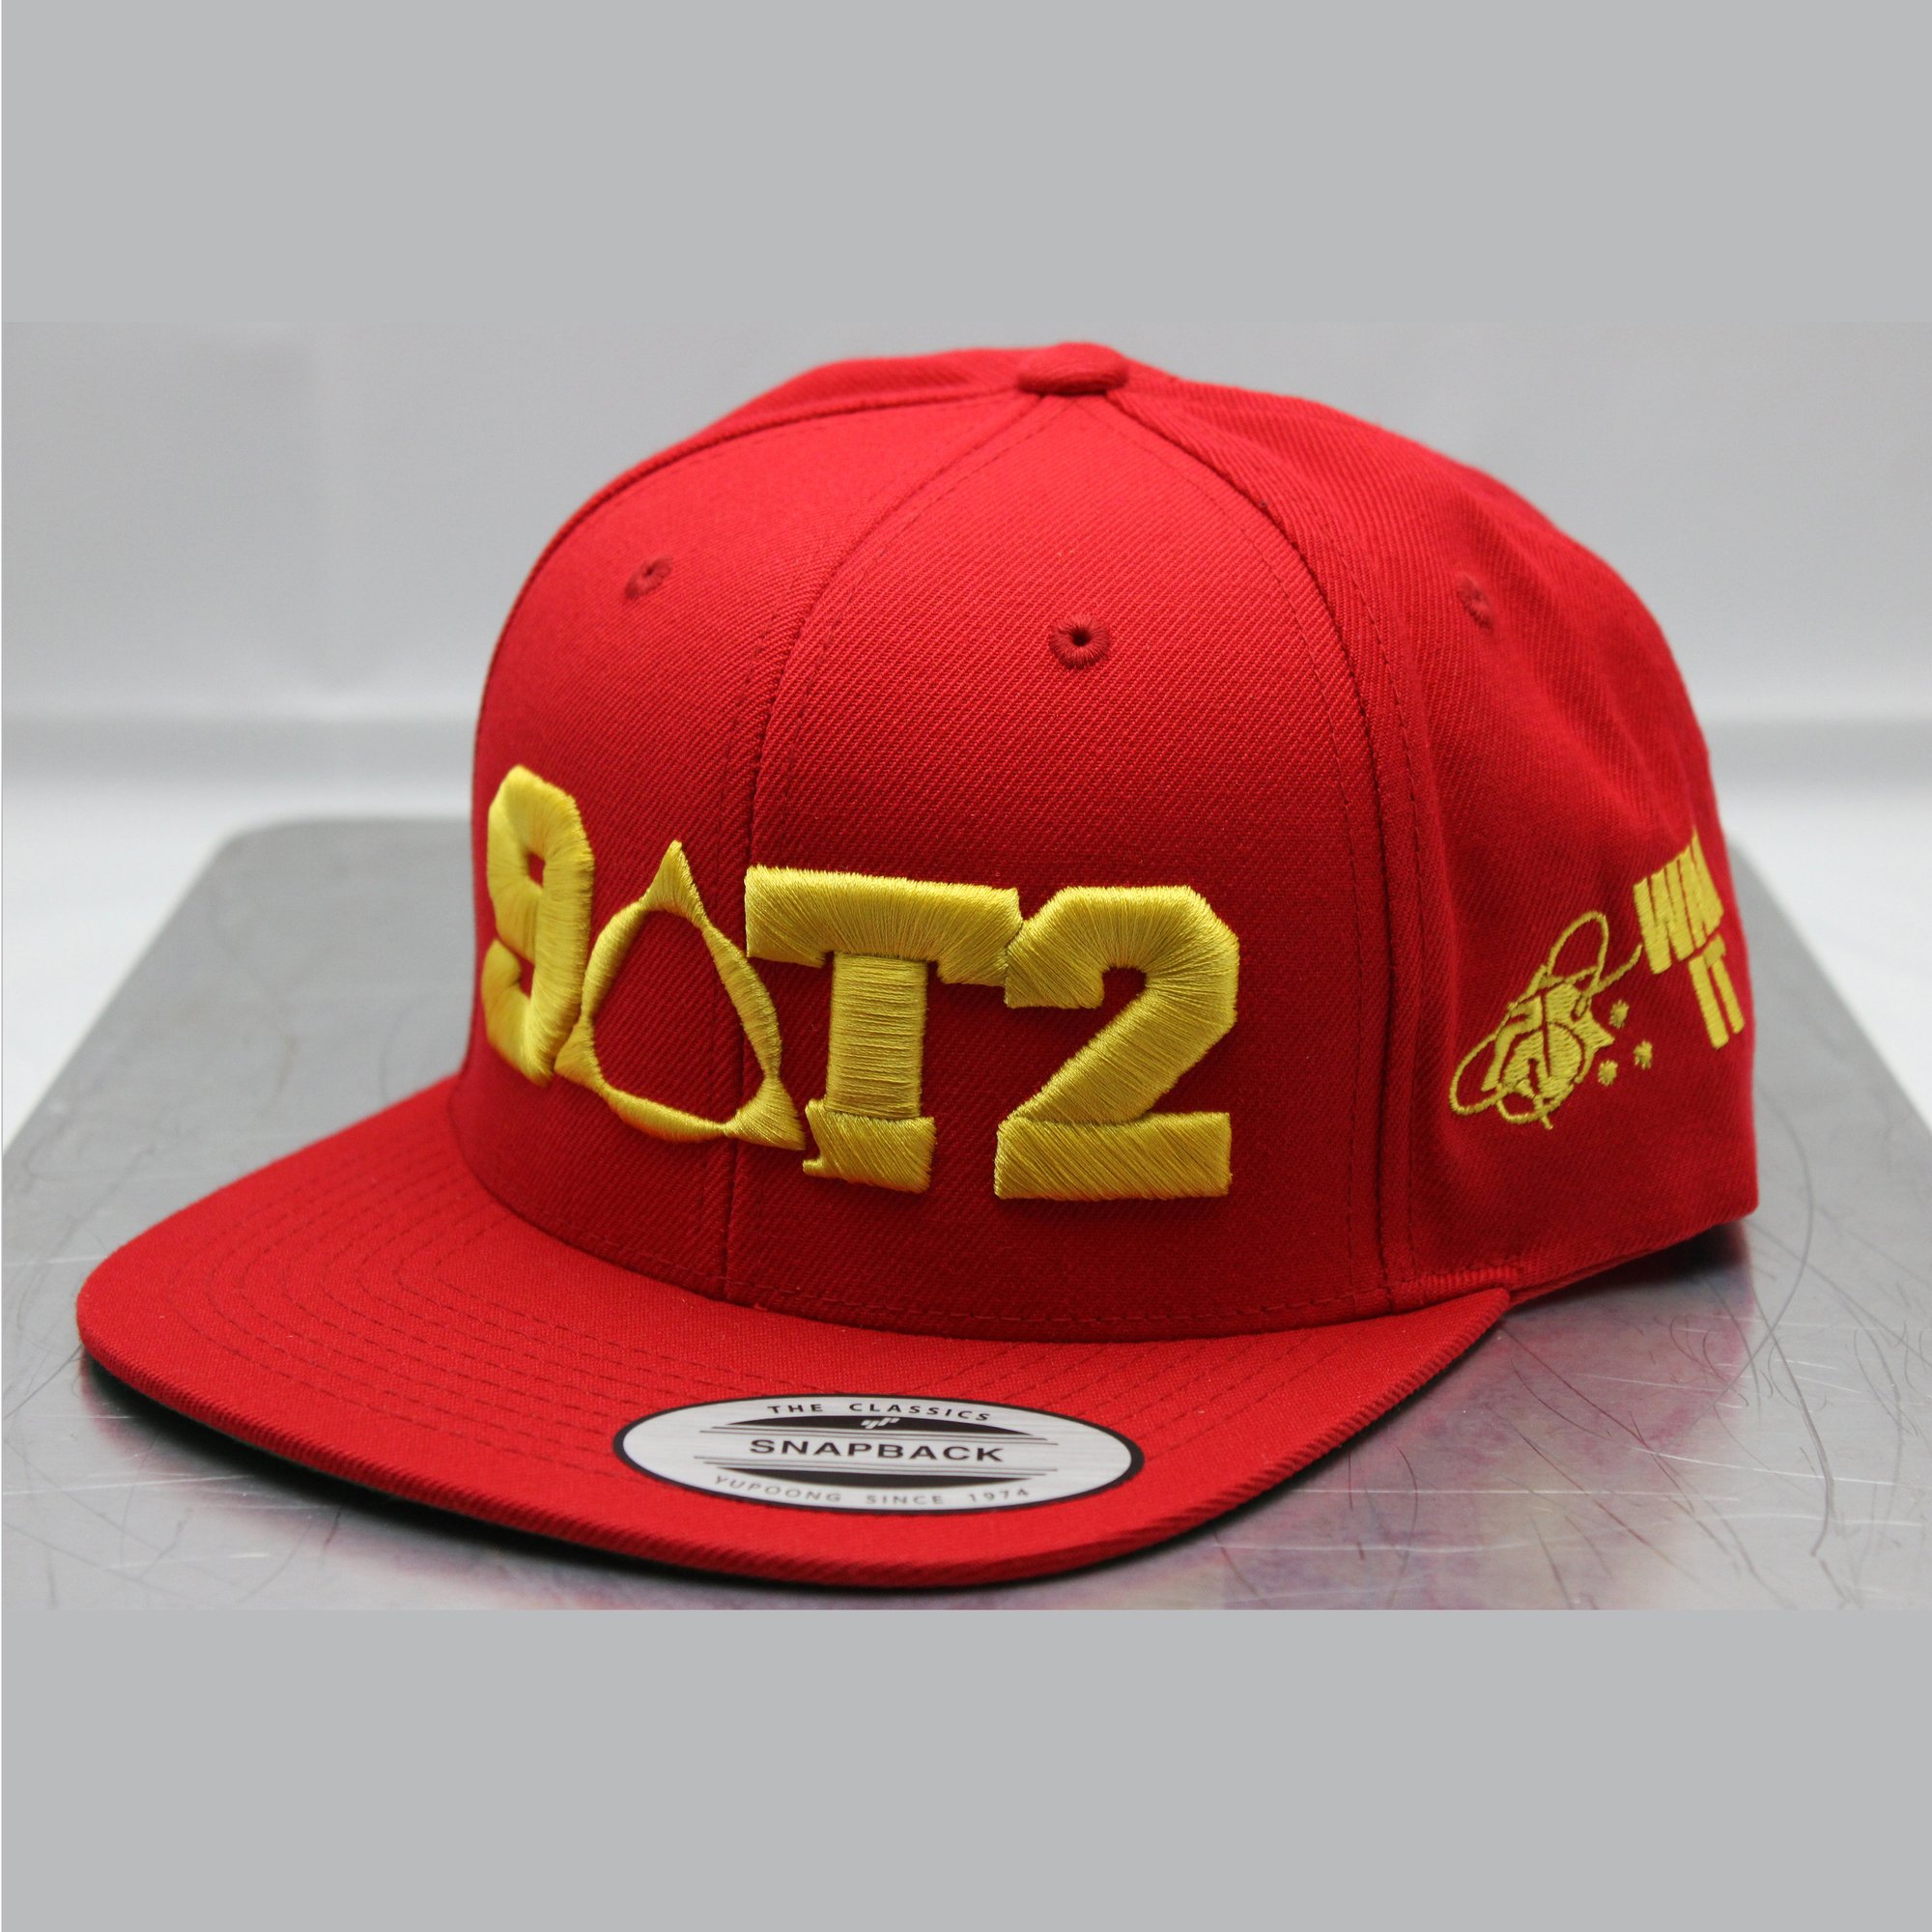 Image of GOT2 Snapback Gold on Red